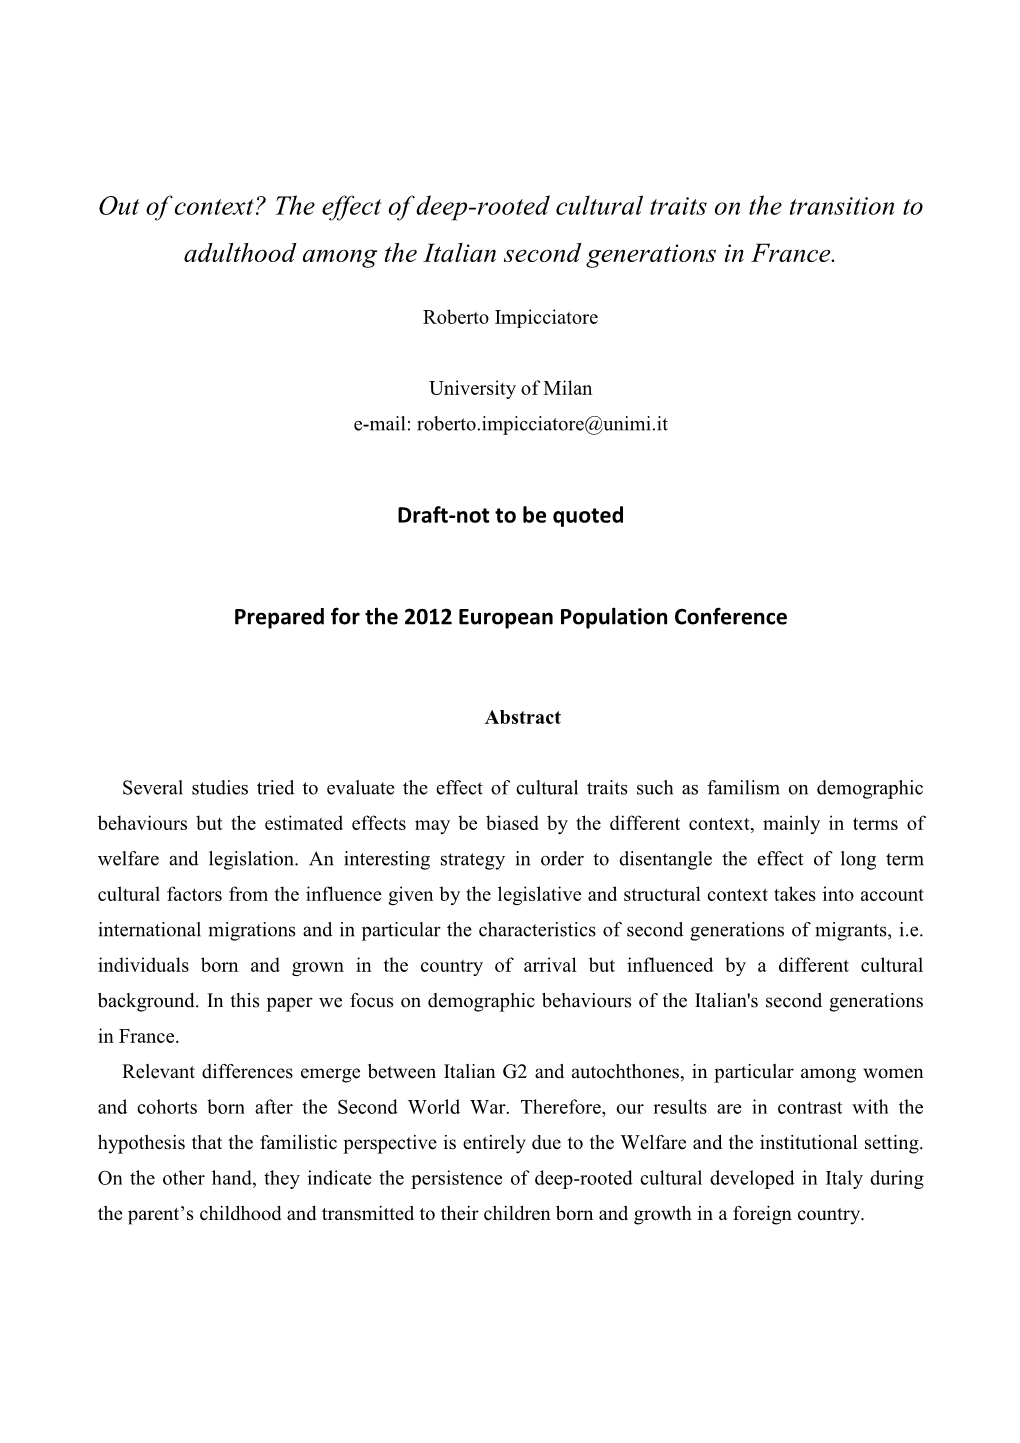 The Effect of Deep-Rooted Cultural Traits on the Transition to Adulthood Among the Italian Second Generations in France